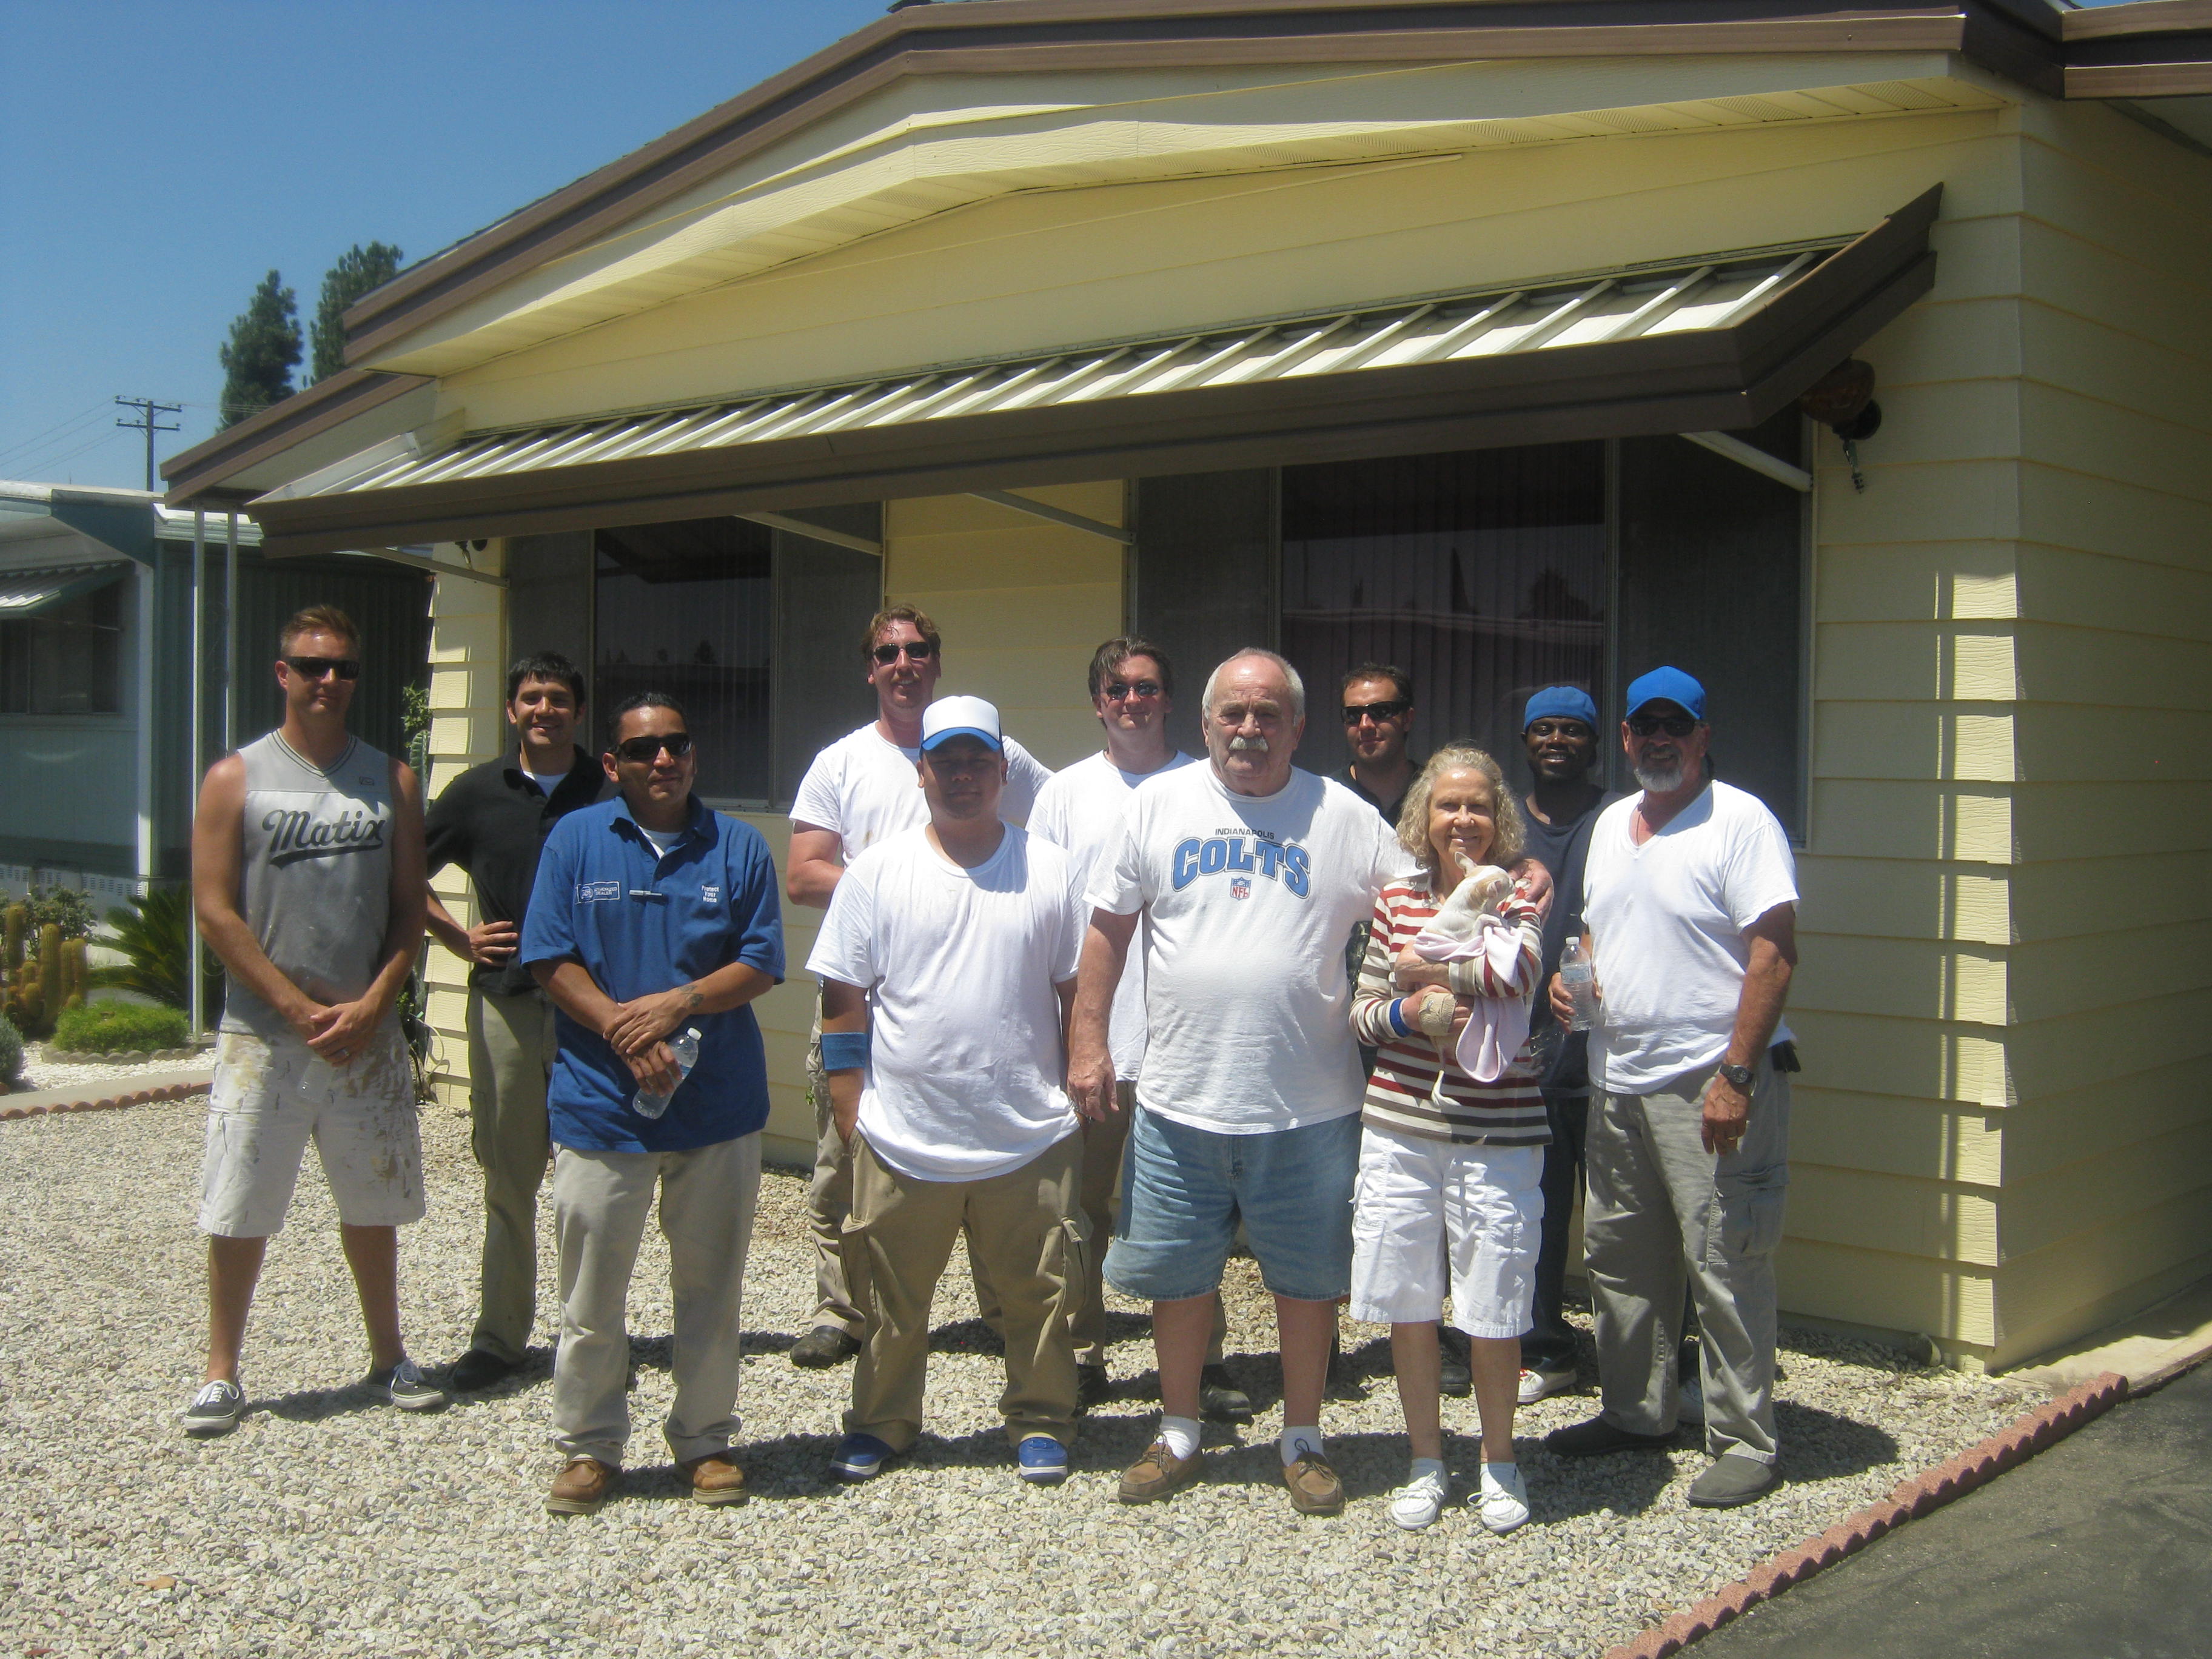 8/14/12: Defender Direct Group Photo with Mobile Home Owner